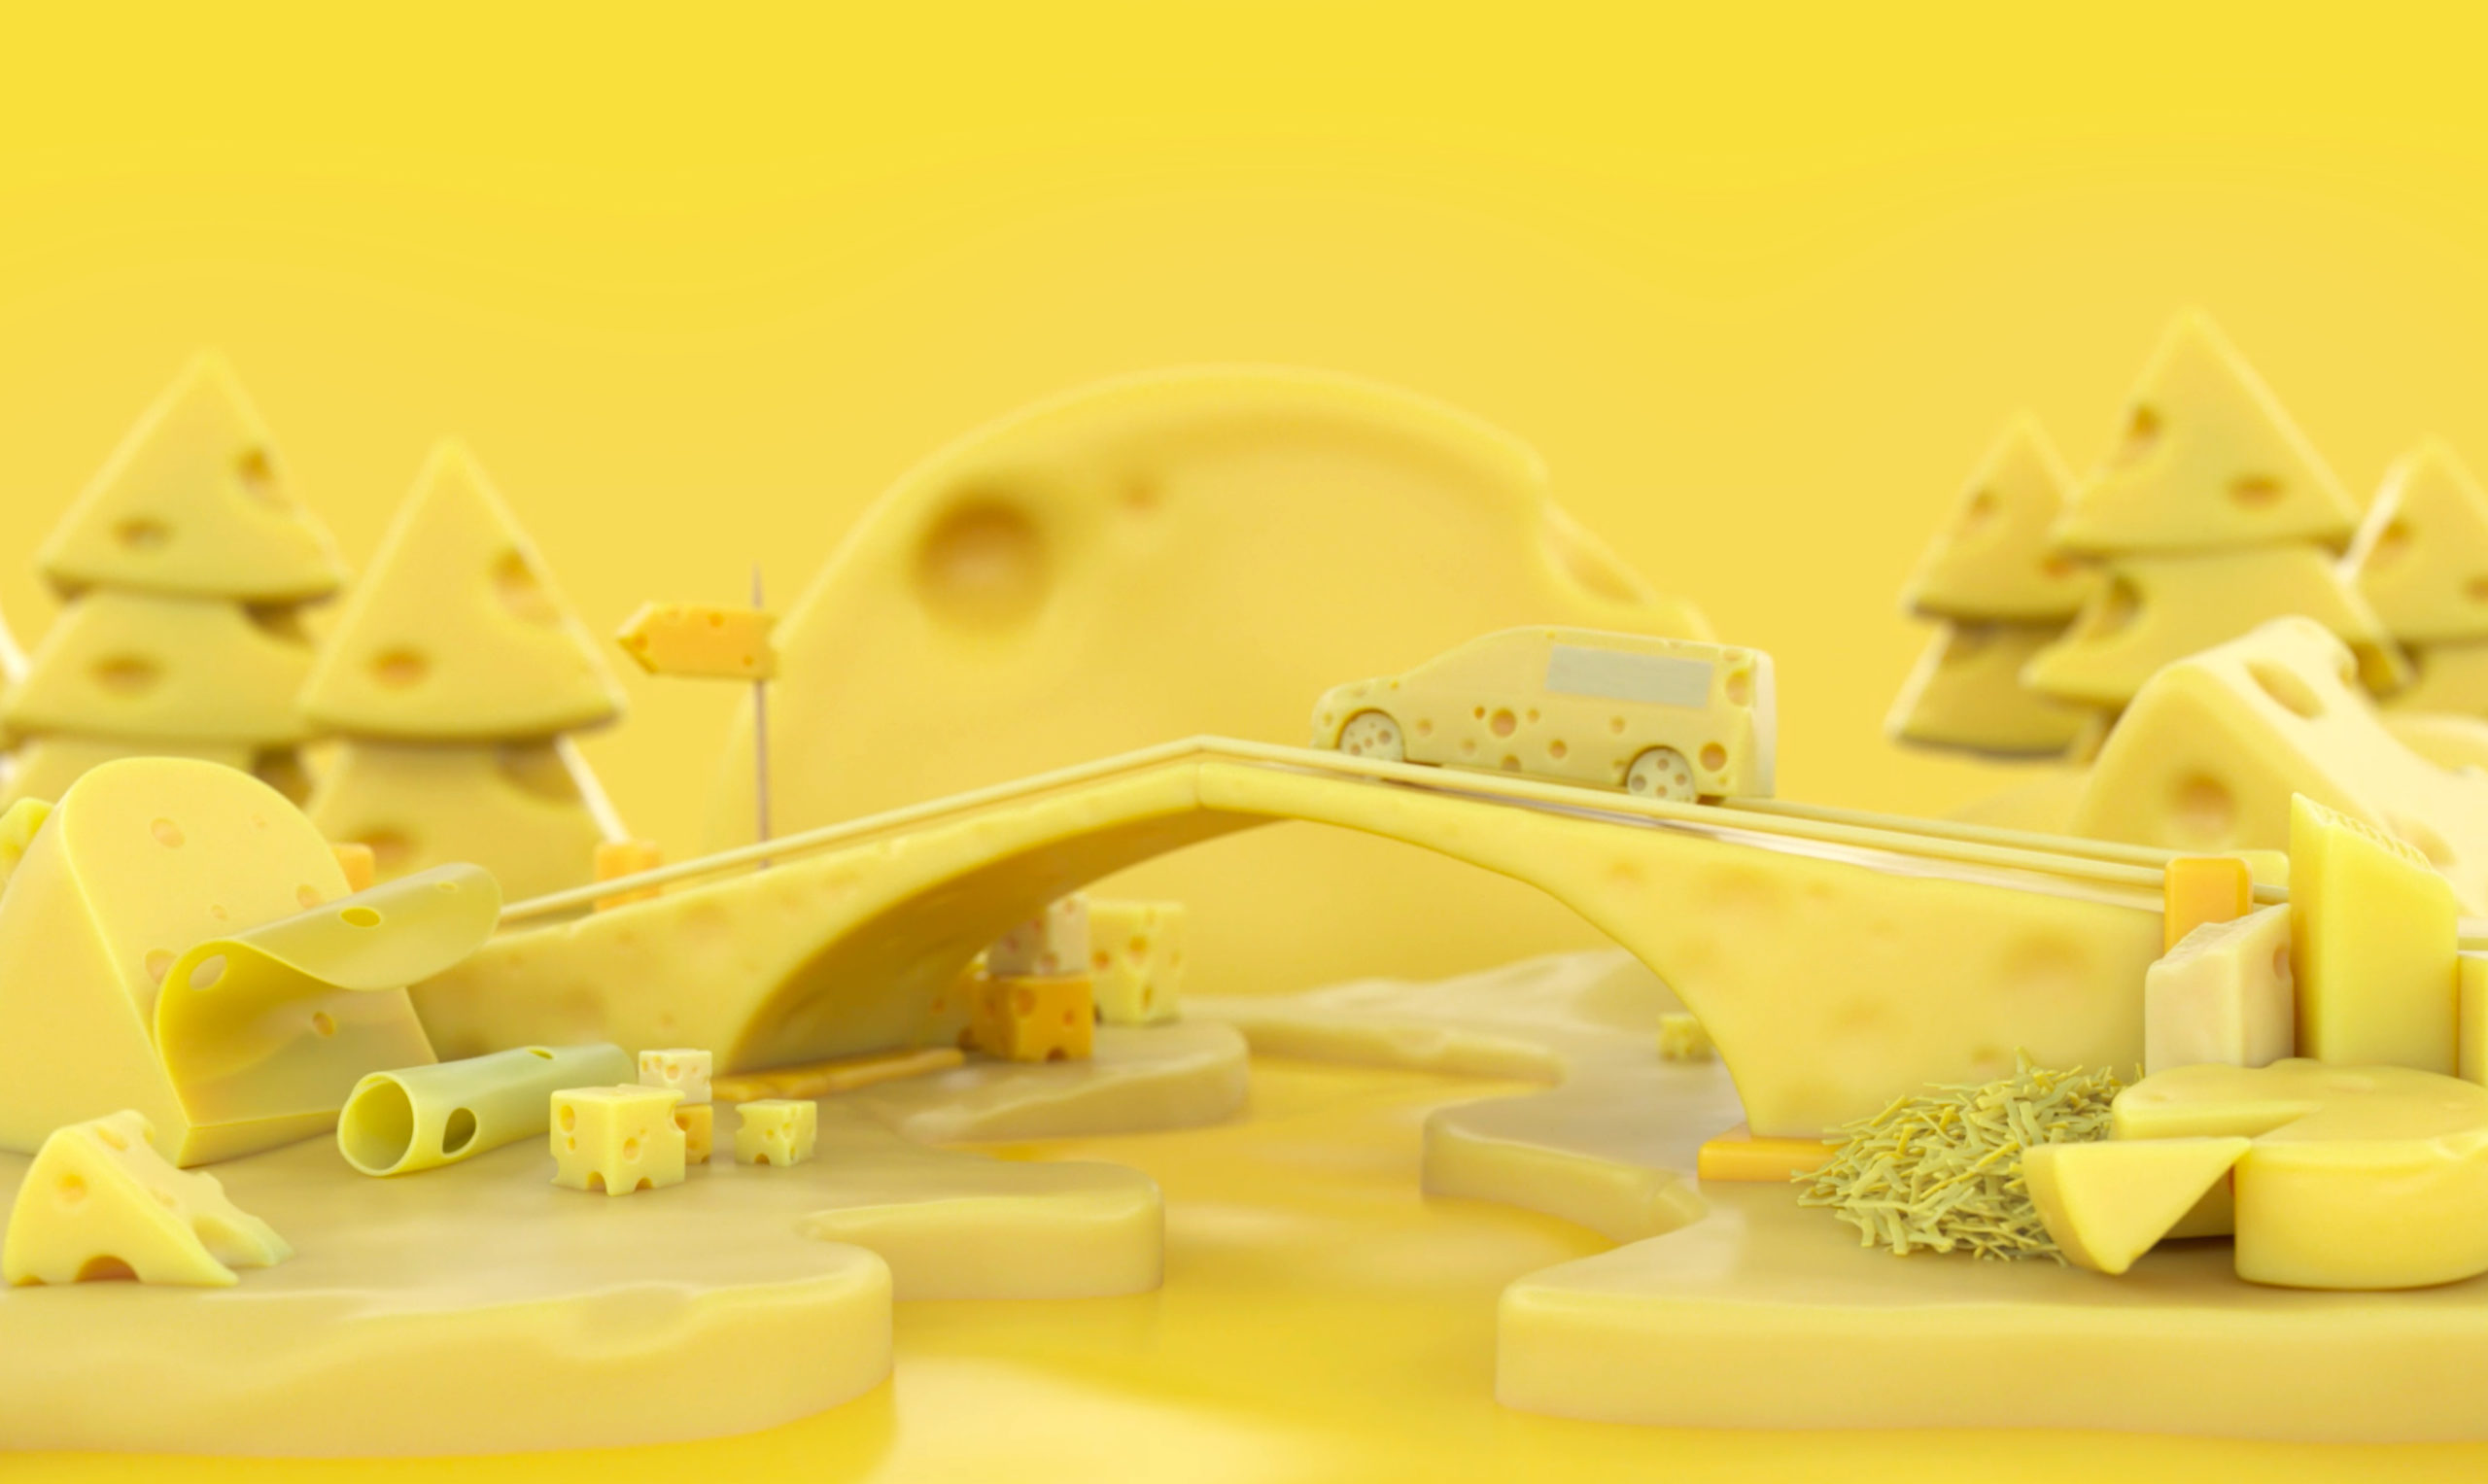 Bridge Cheese welcomes customers into a whole new world of cheese